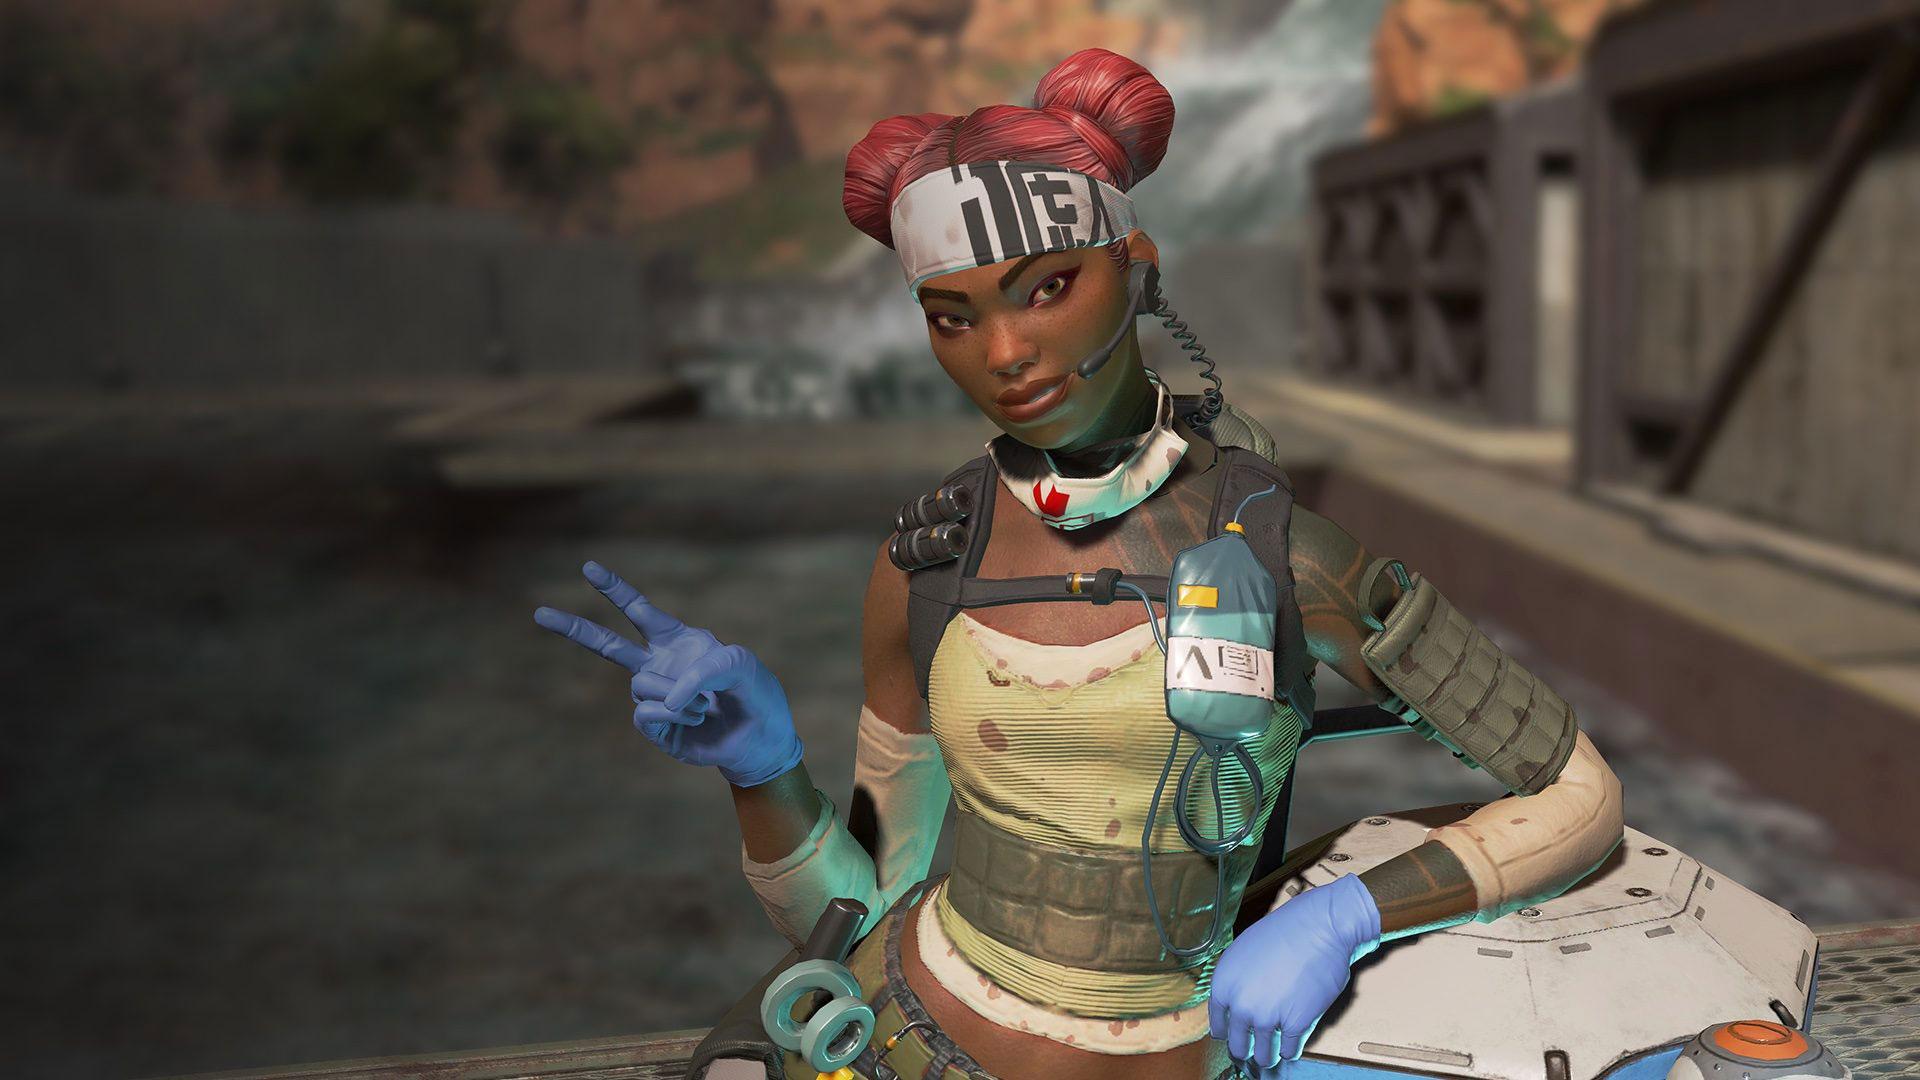 apex legends lifeline making peace symbol while leaning on D.O.C drone